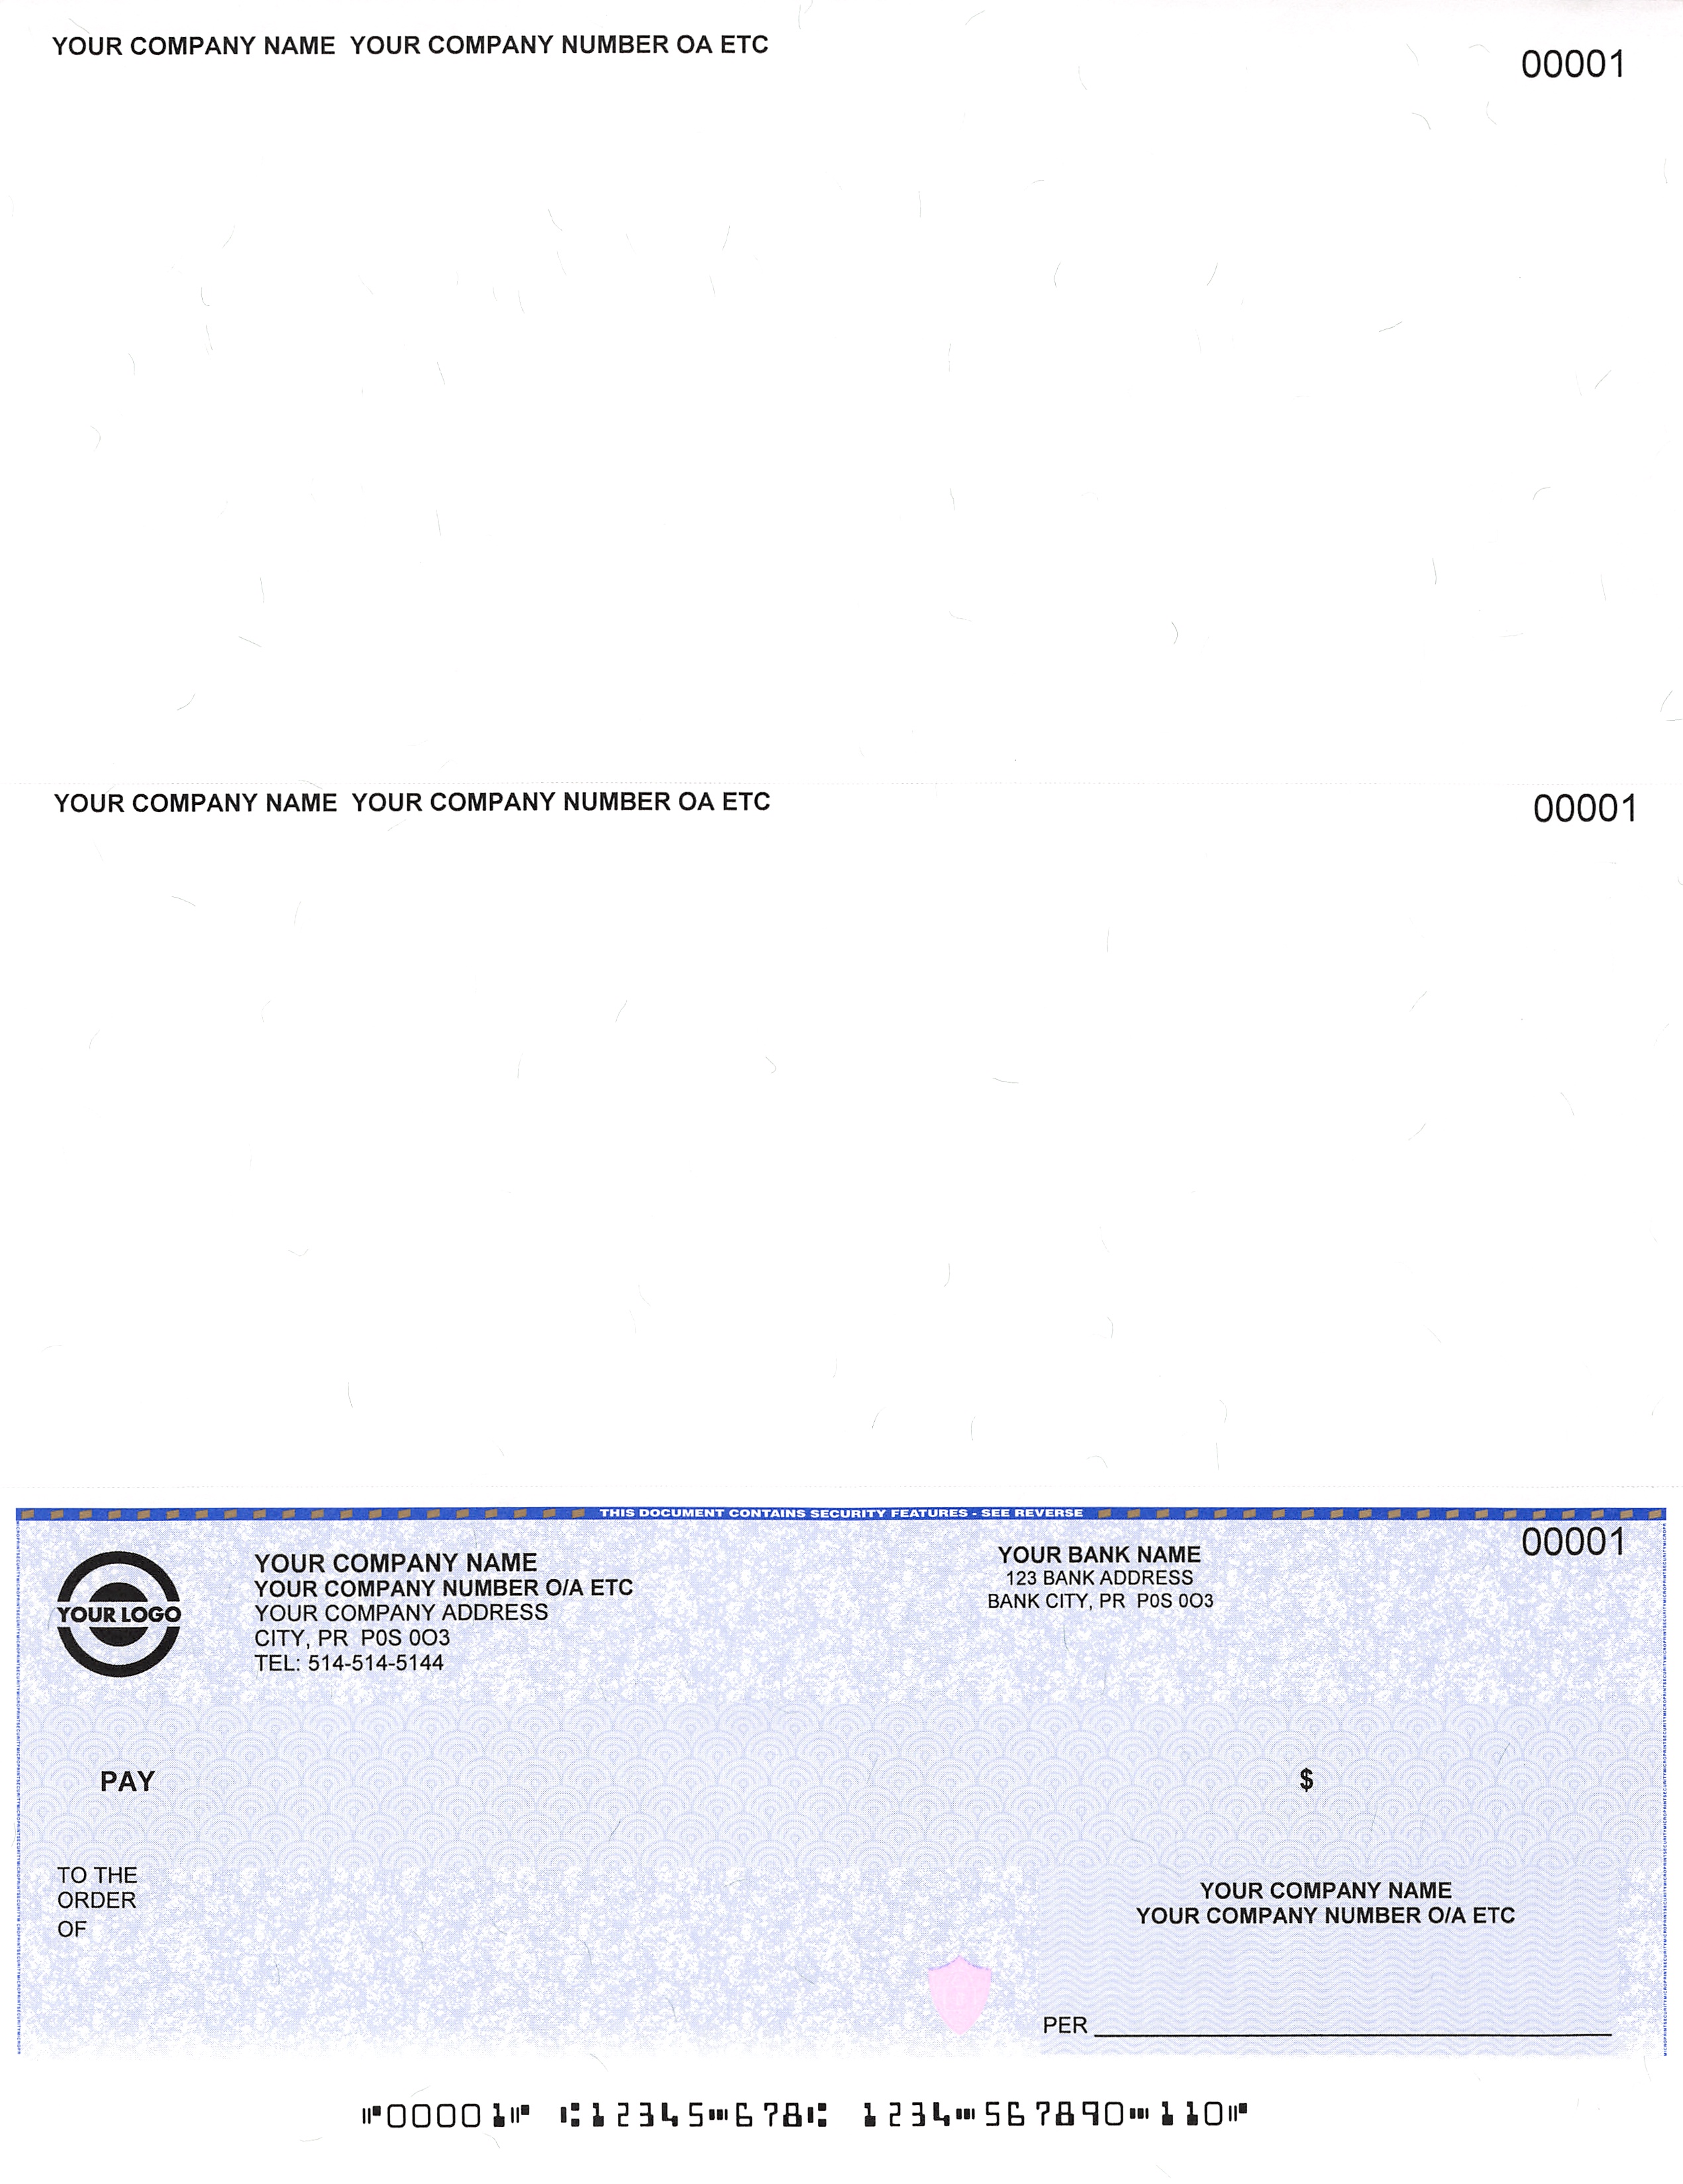 Laser Cheques / Computer Cheques on Bottom